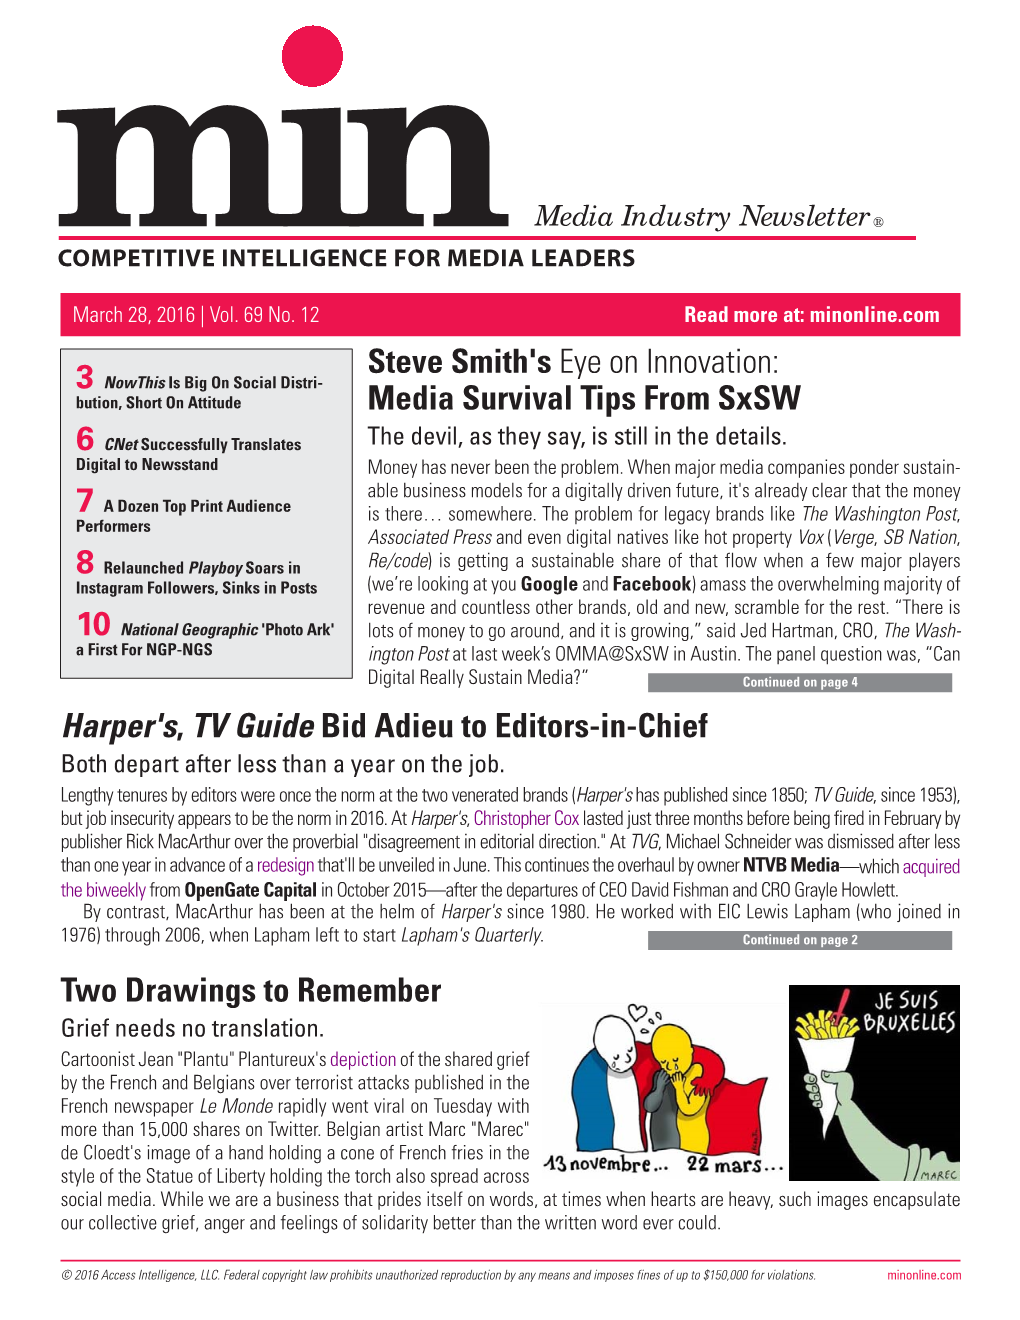 Steve Smith's Eye on Innovation: Media Survival Tips from Sxsw Harper's, TV Guide Bid Adieu to Editors-In-Chief Two Drawings To